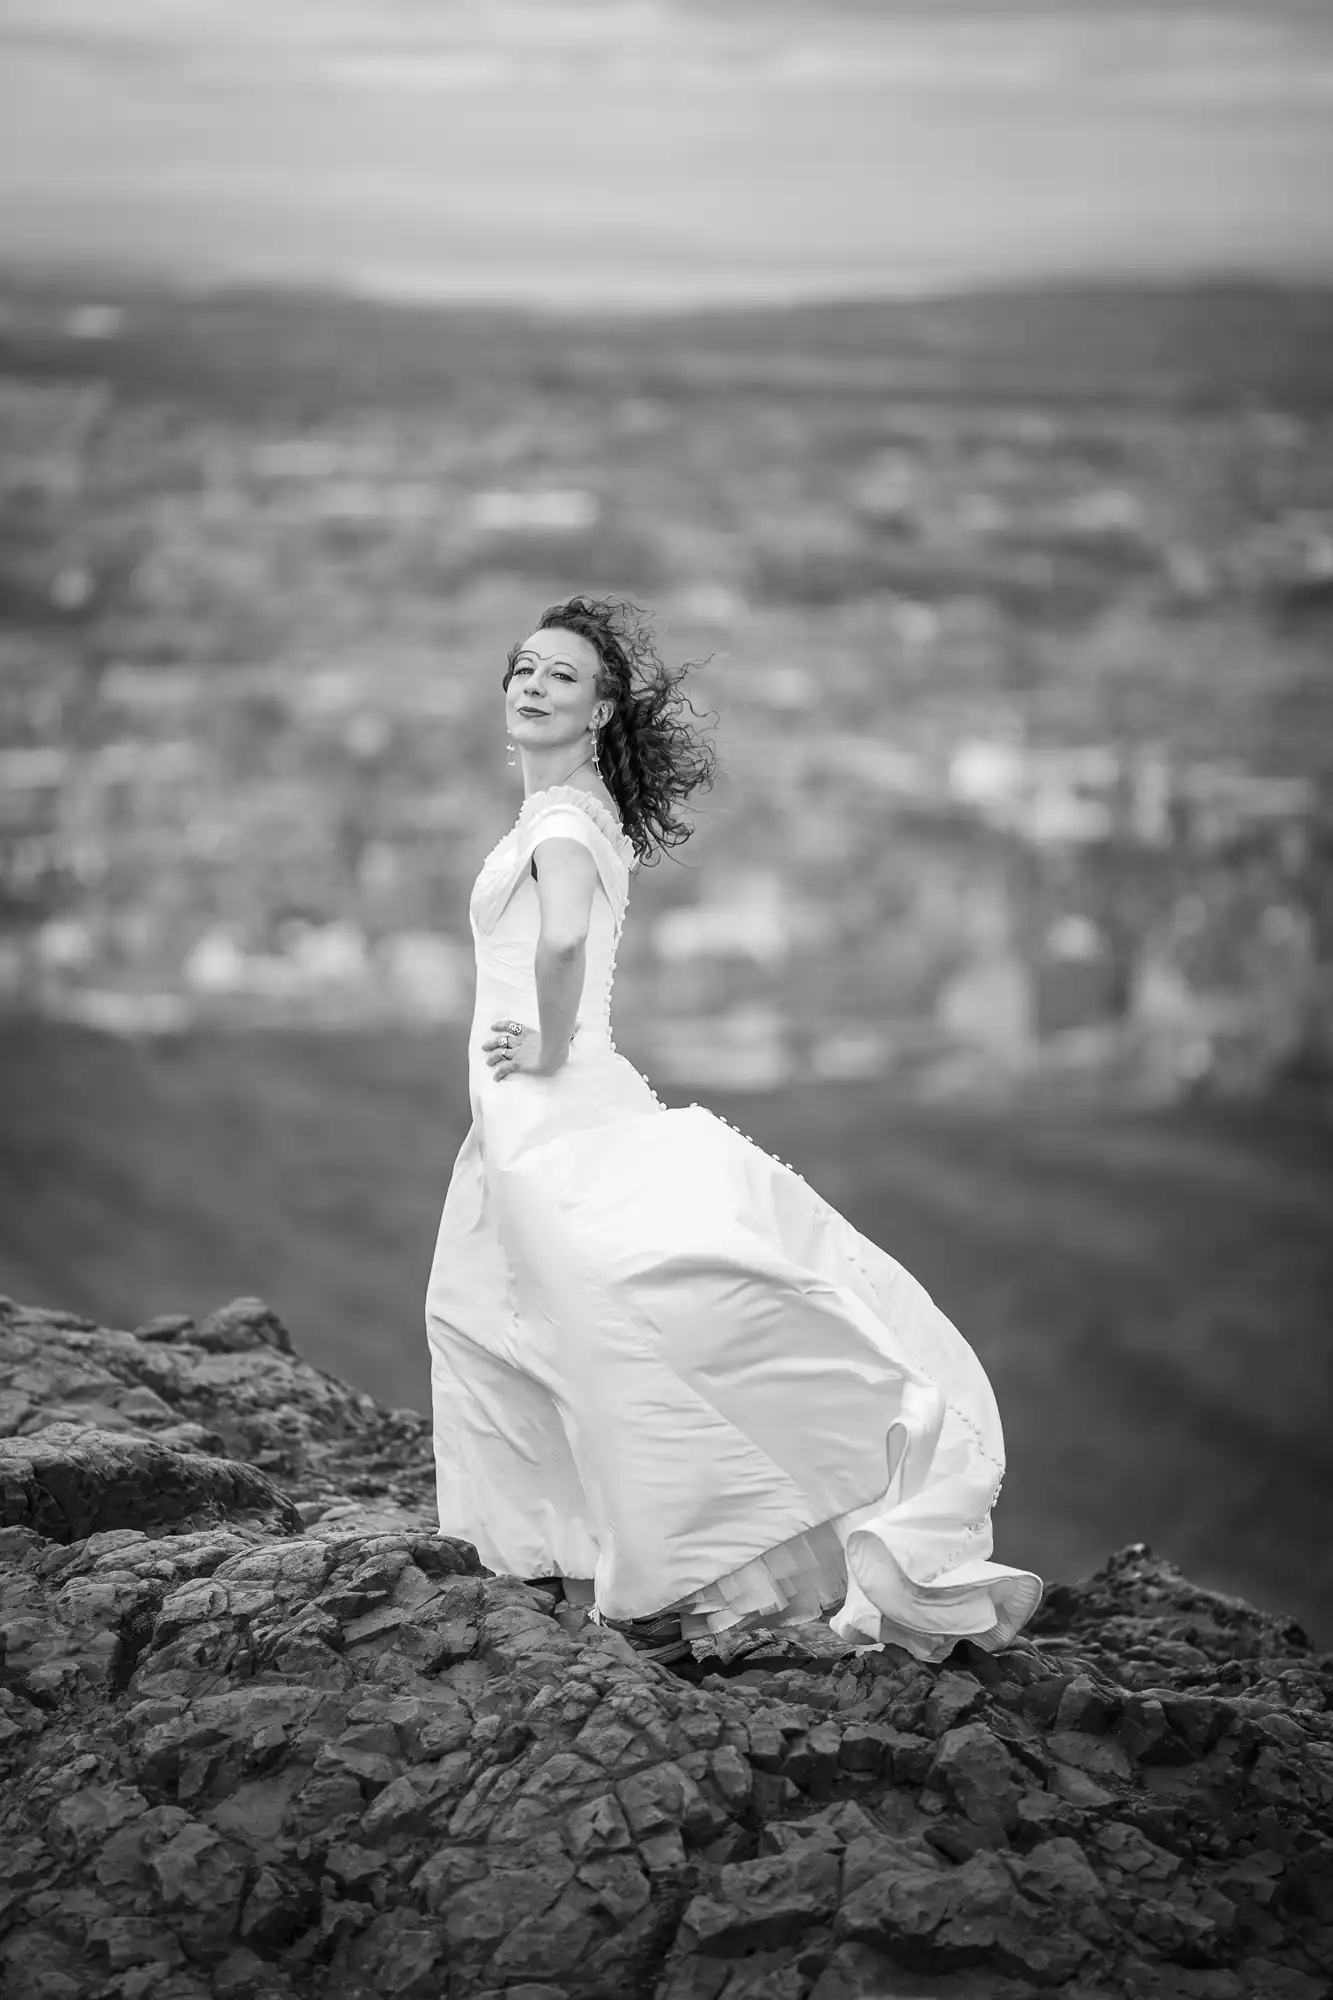 A woman in a white dress stands on a rocky peak, her hair blowing in the wind, with a blurred cityscape in the background, captured in black and white.